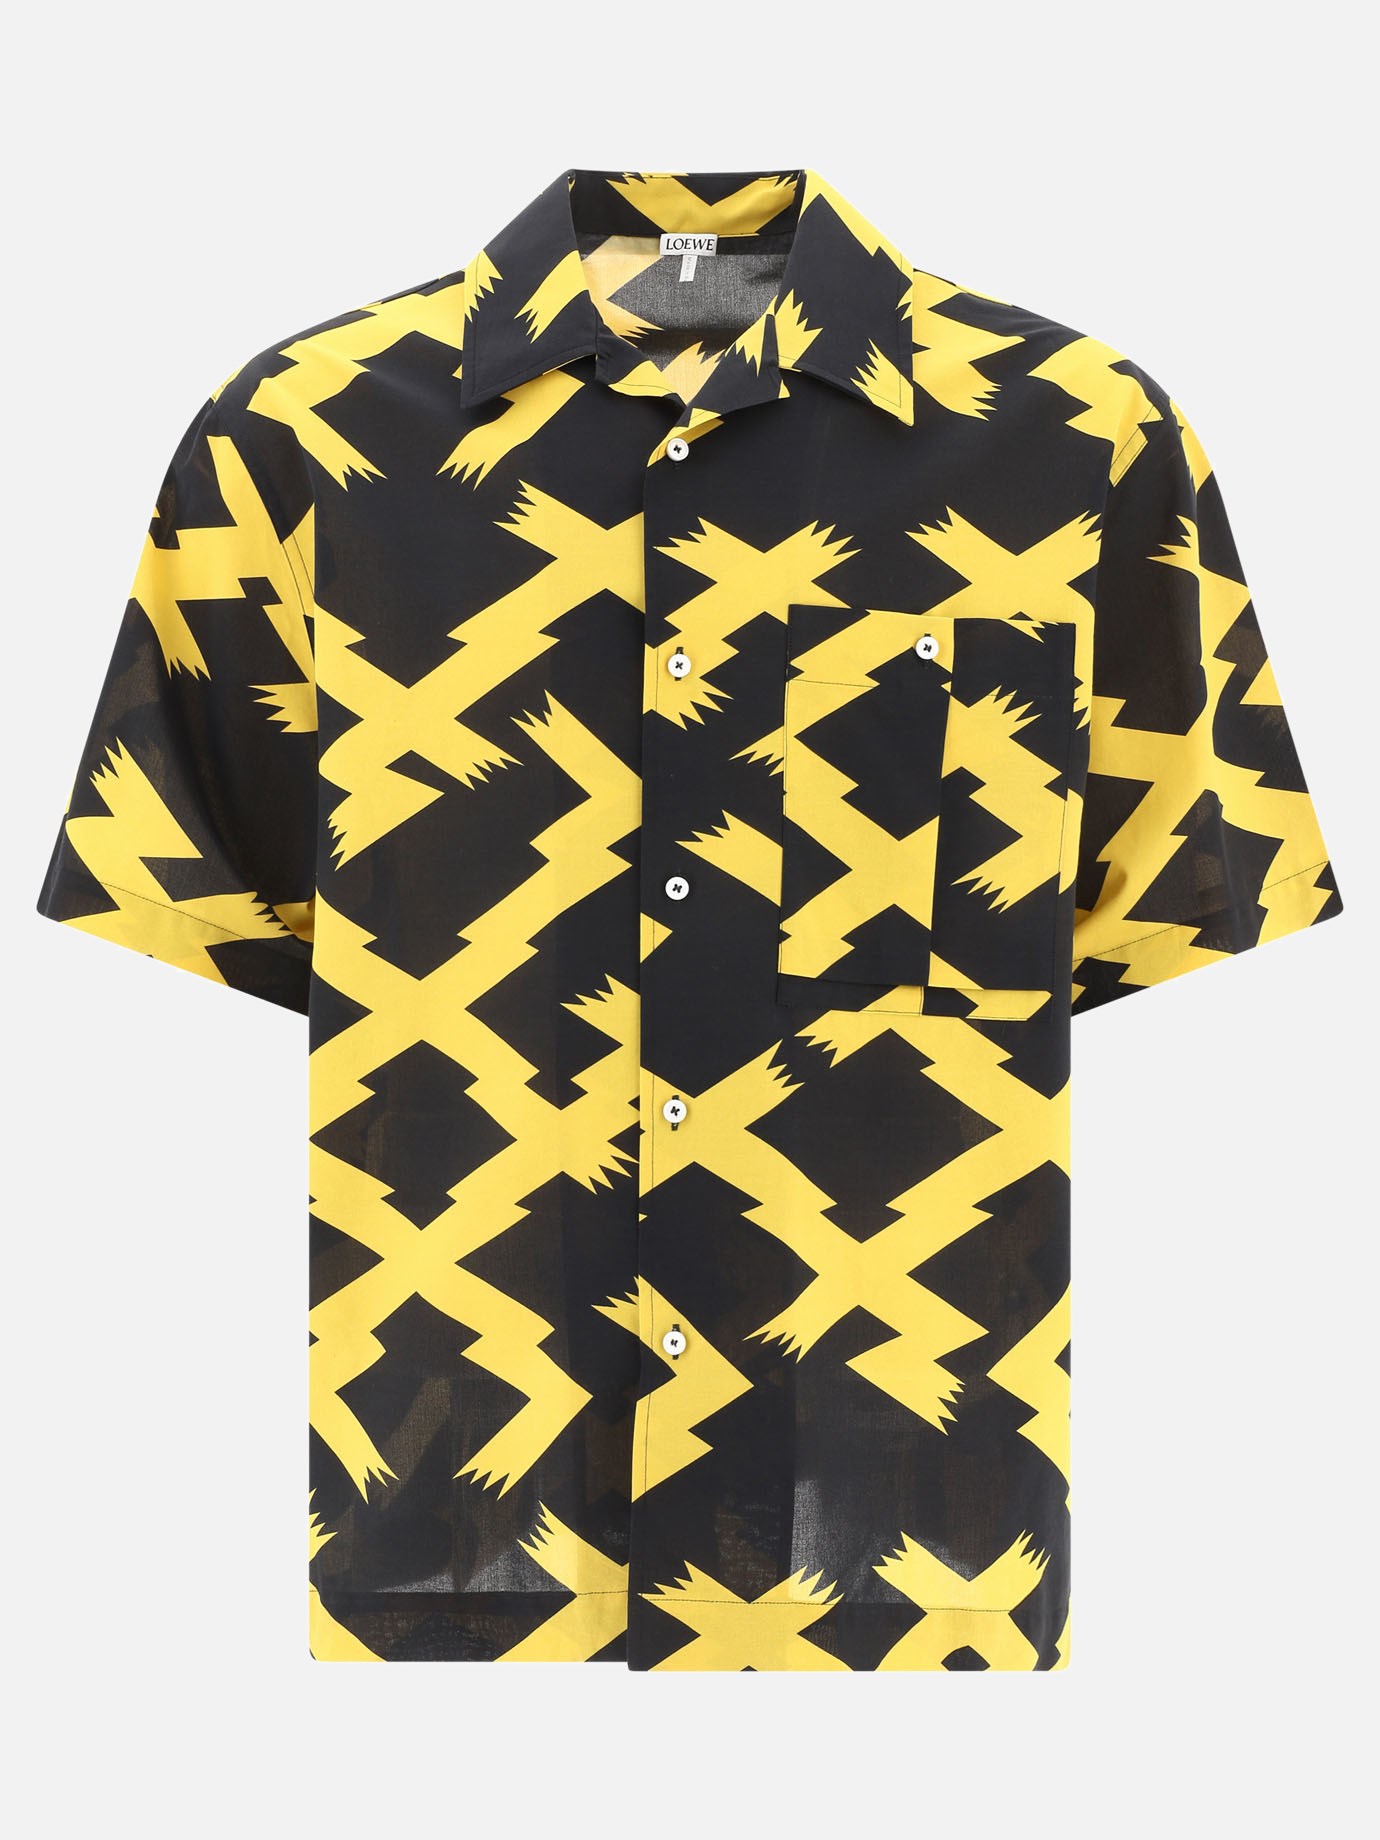 All-over shirt